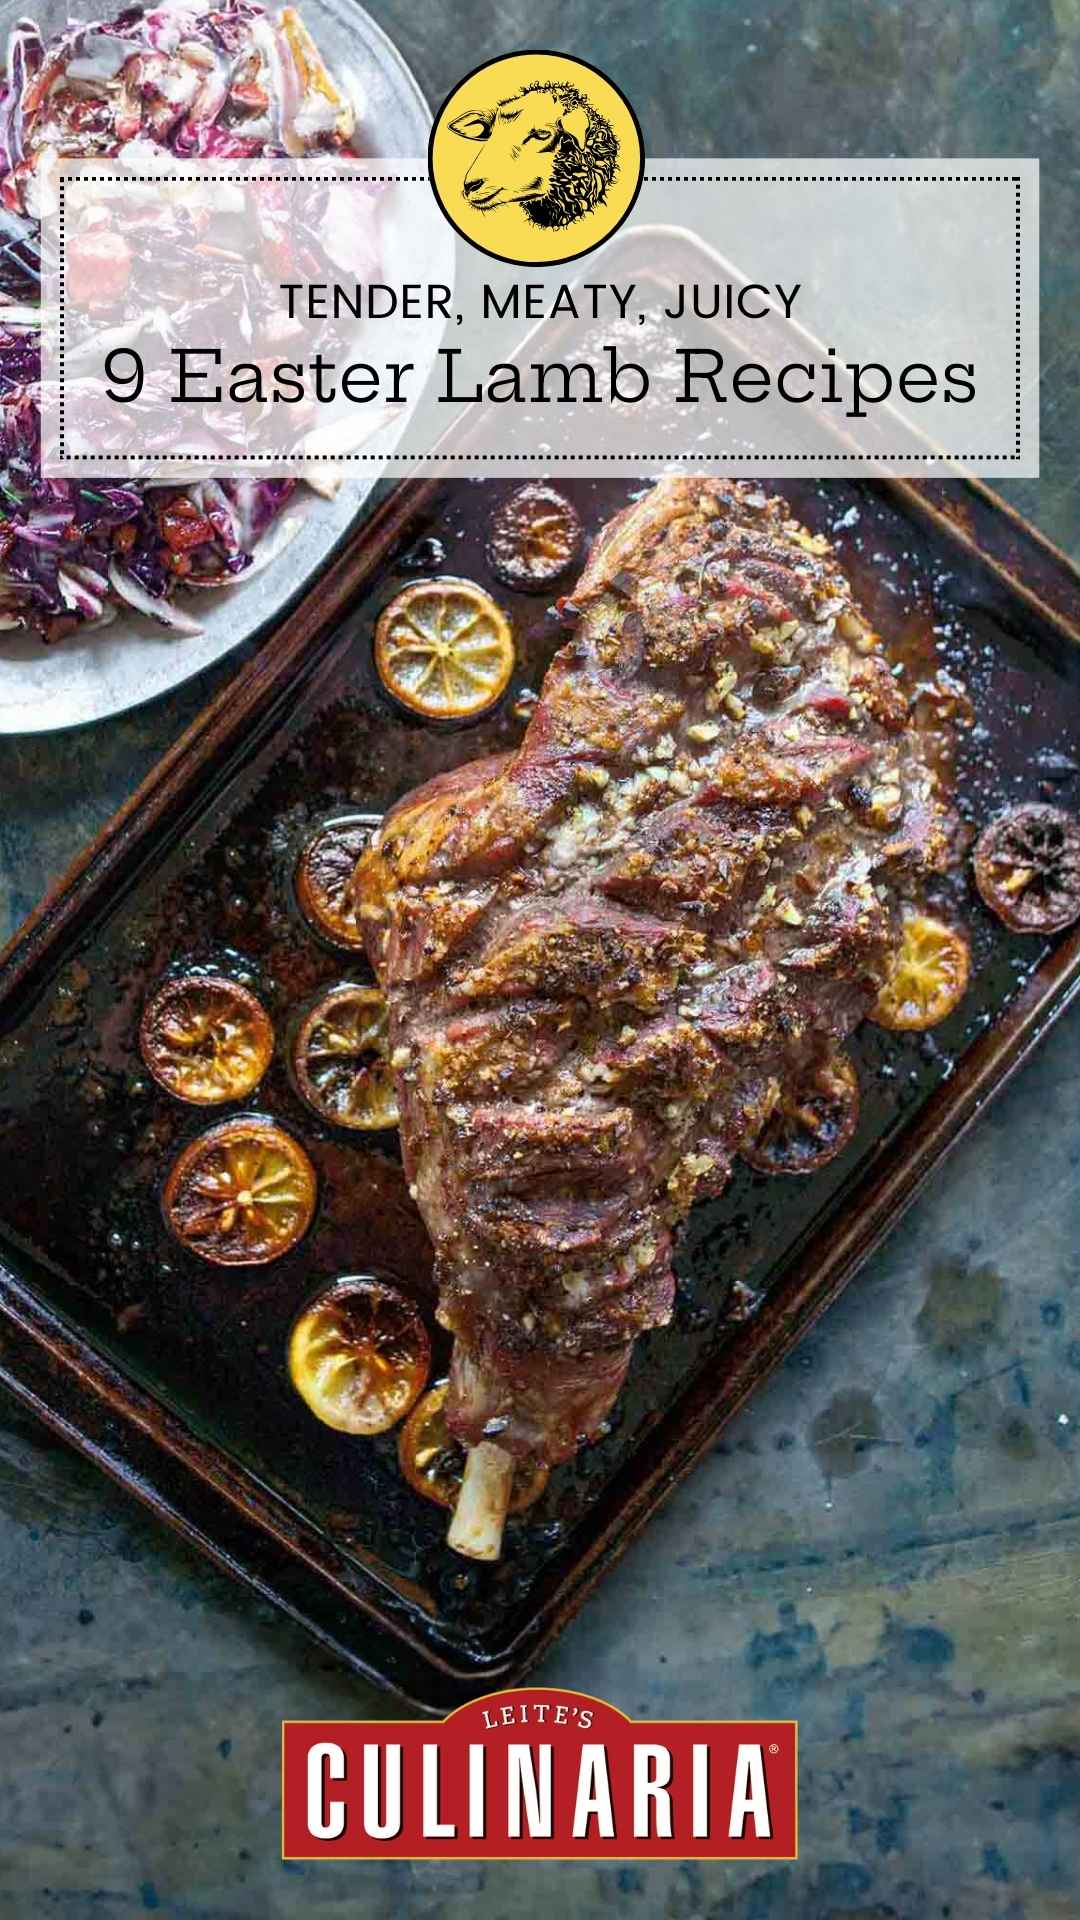 A roast leg of lamb topped with lemon slices on a rimmed baking sheet.